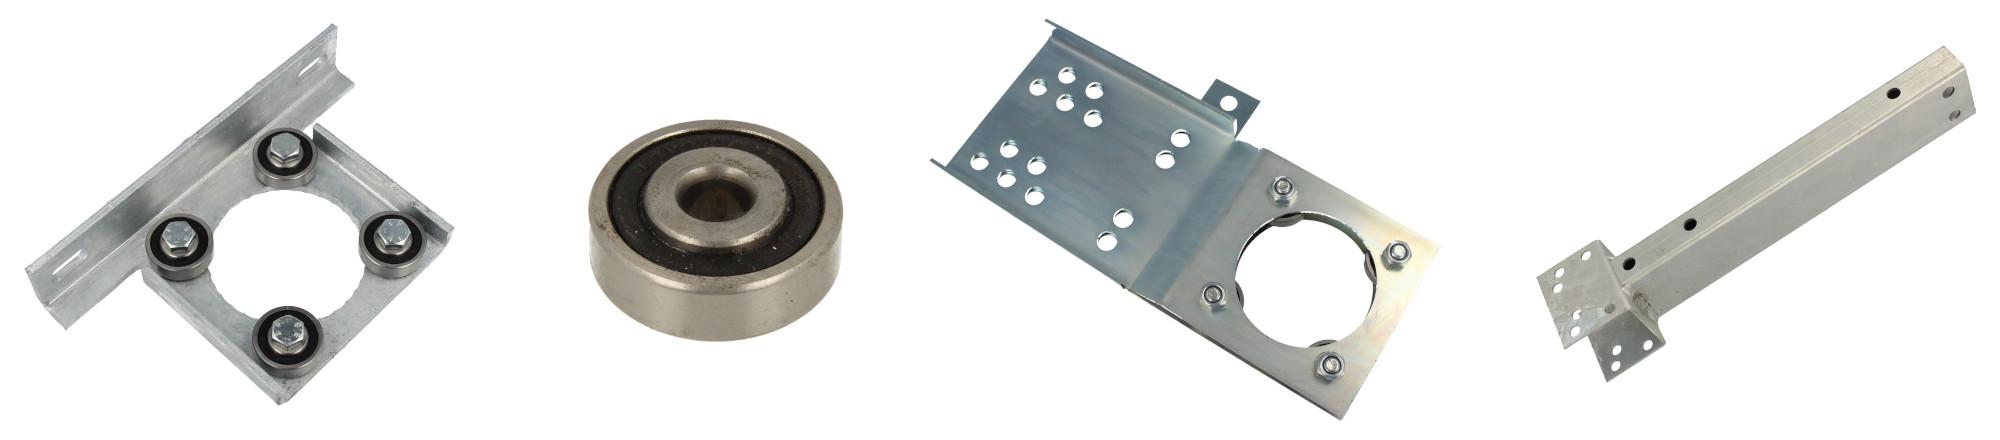 Bearing plates and mounting accessories